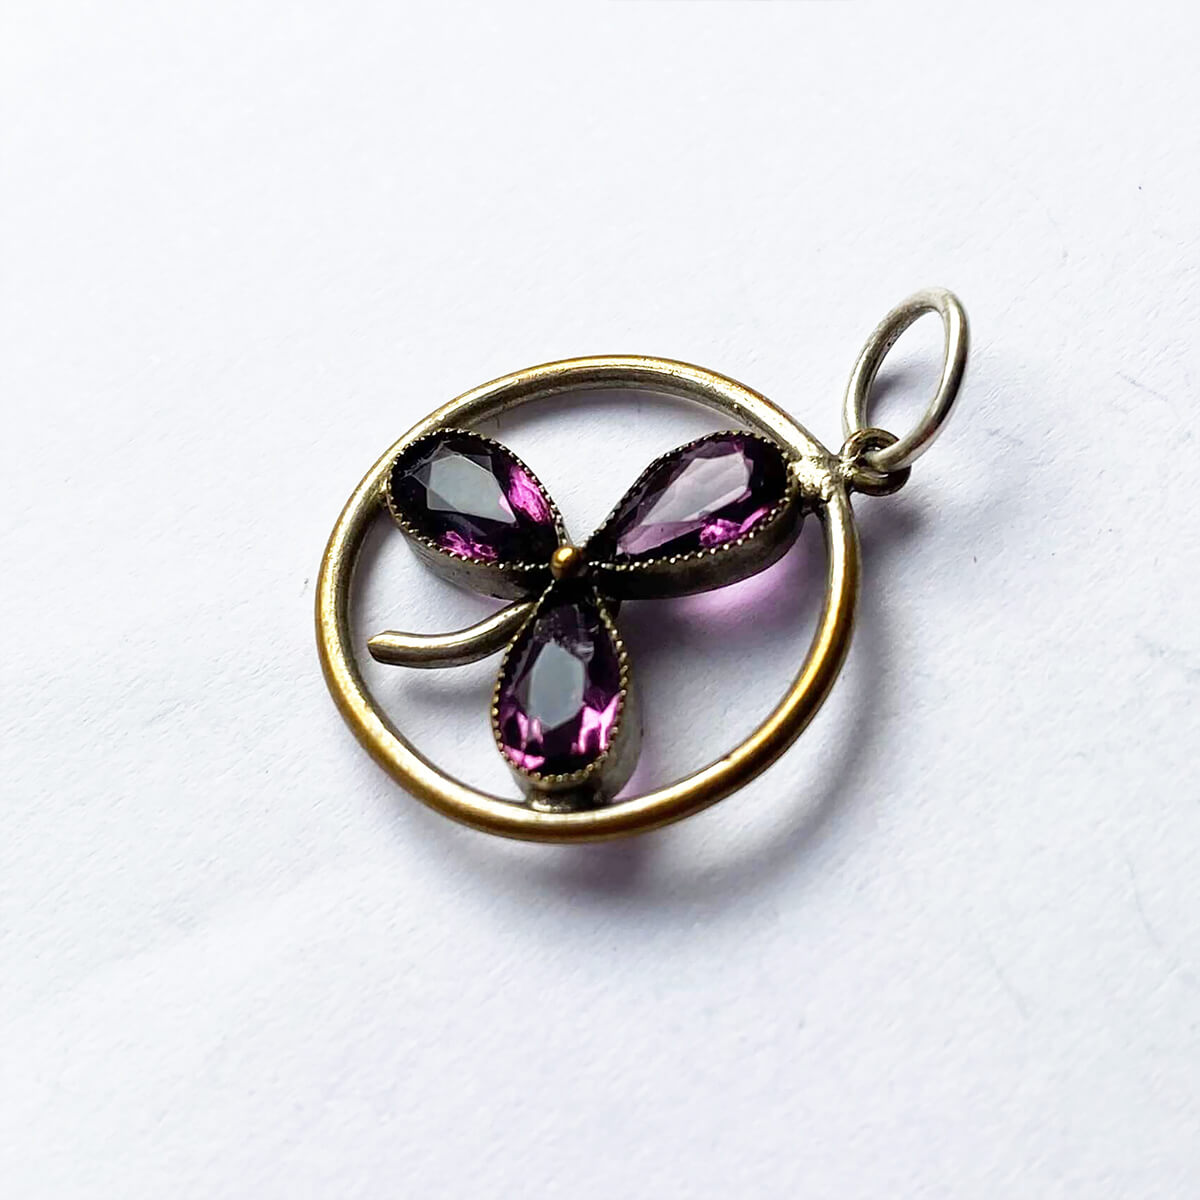 Antique French amethyst clover leaf charm gilded silver pendant from Charmarama